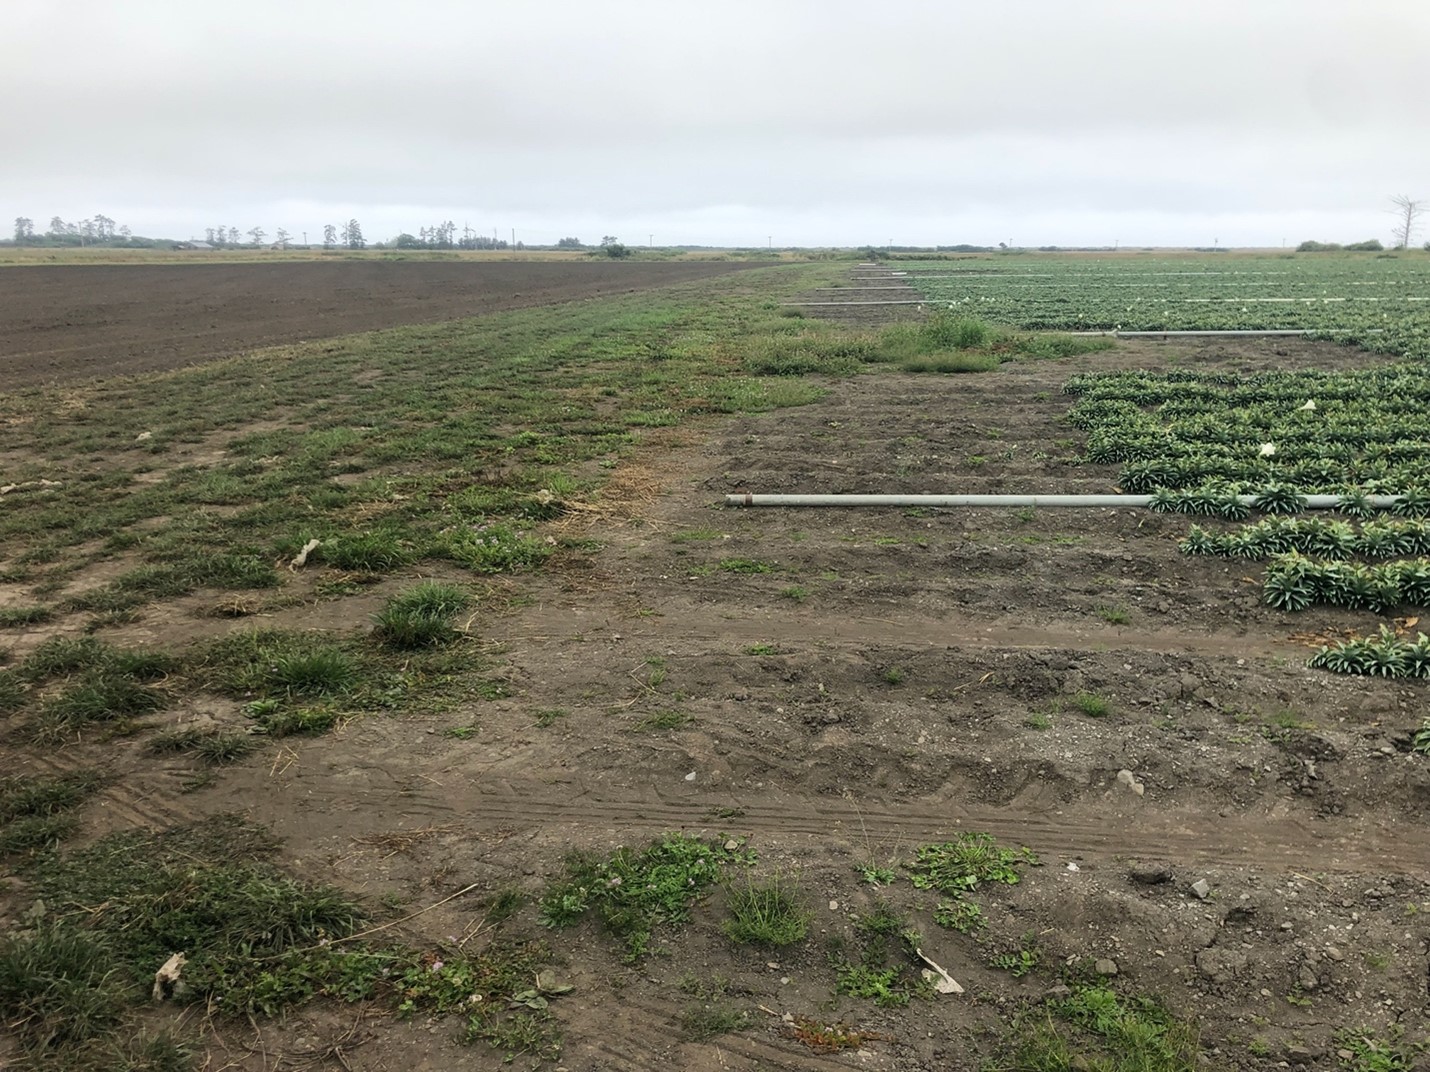 Two lily fields with a grass filter strip between them. The field on the right has full grown lilies and the field on the left is bare dirt being prepped for next years' crop.